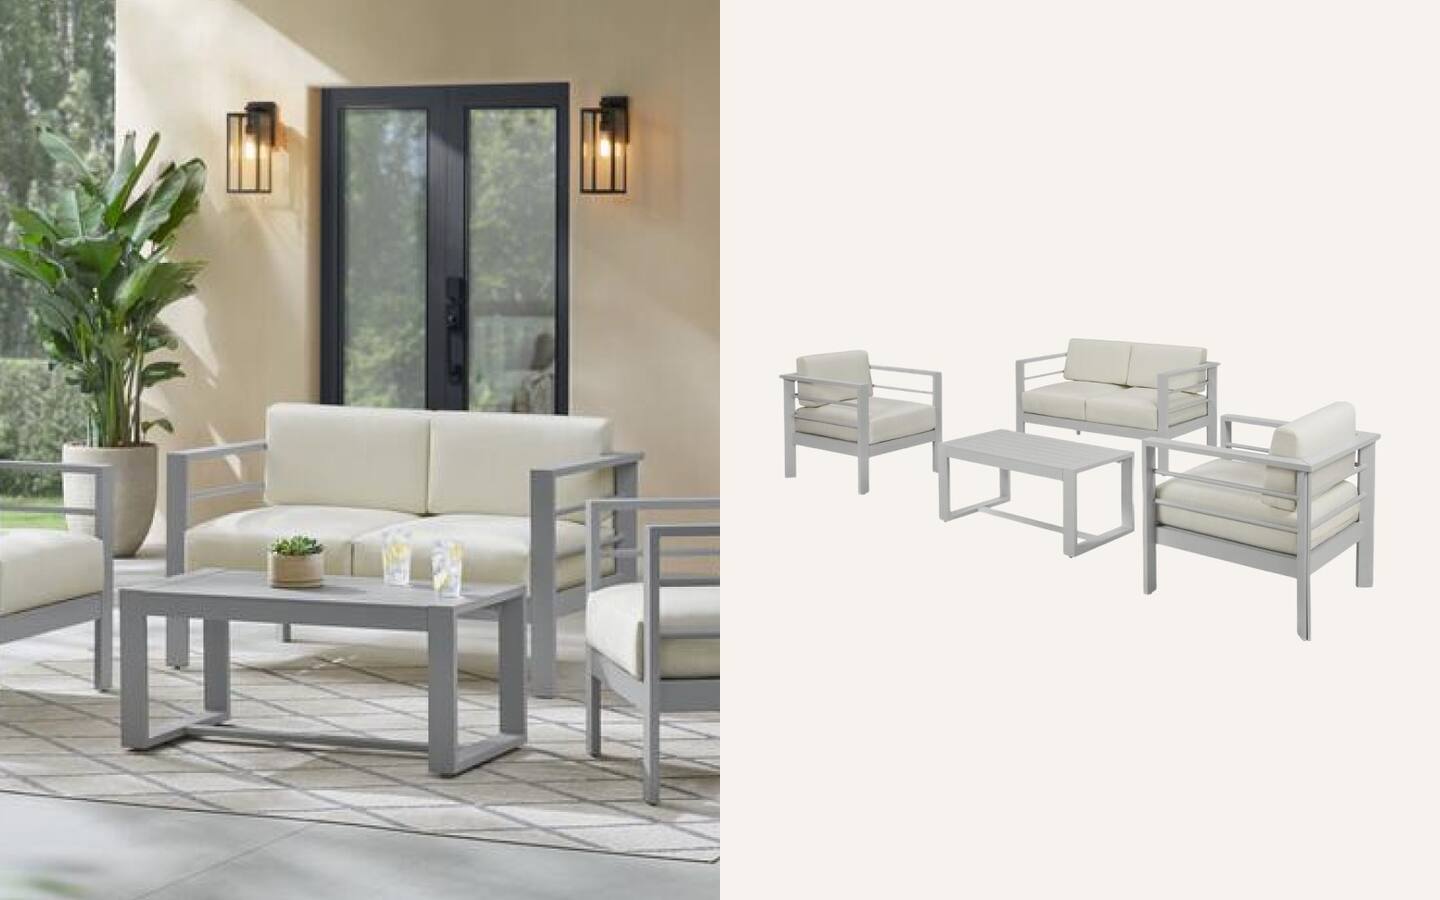 Image for UP TO 60% OFF SELECT PATIO FURNITURE